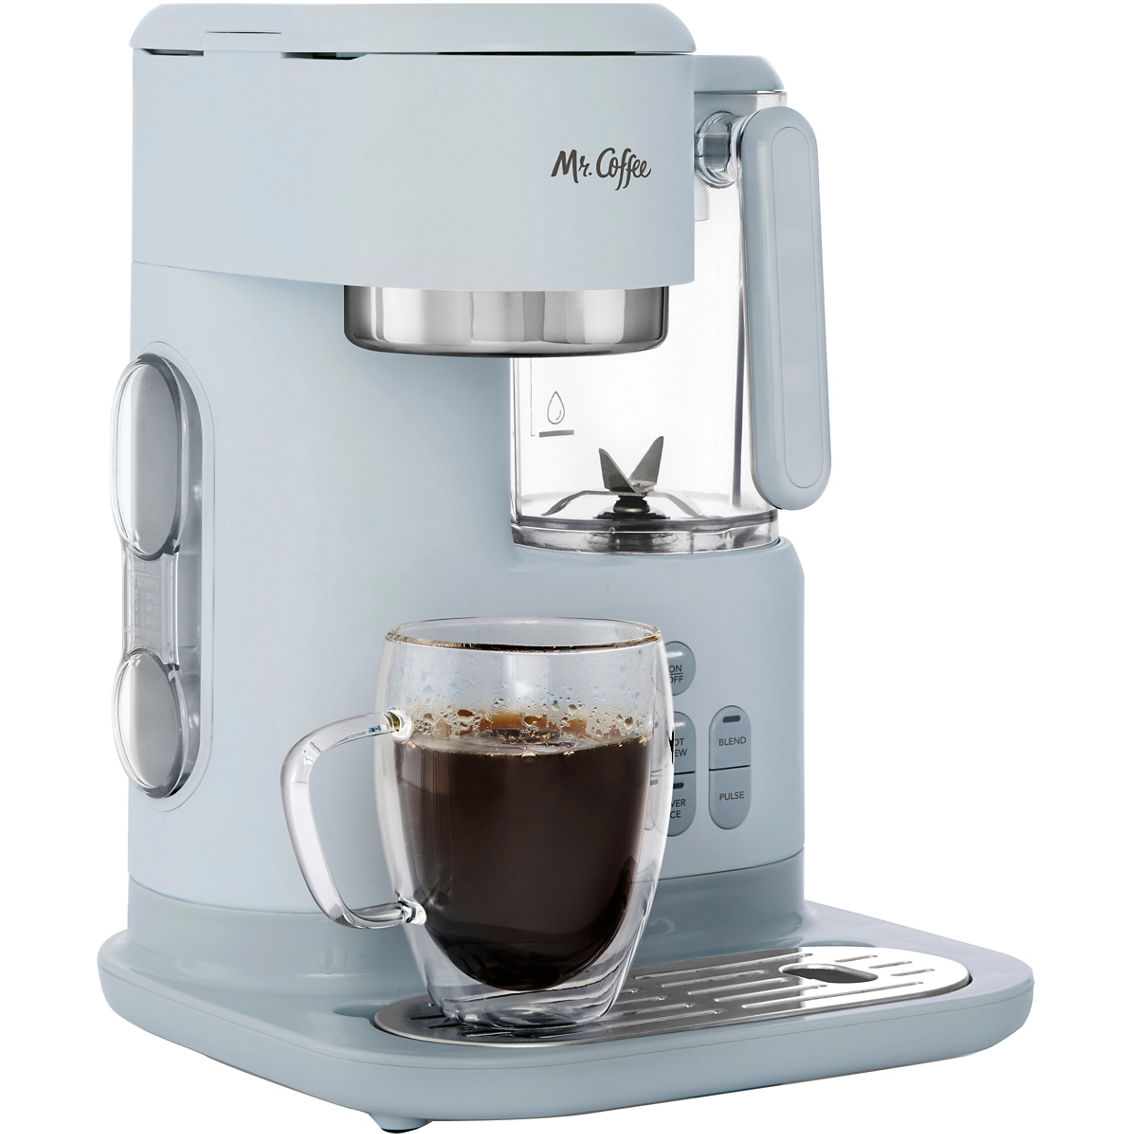 Mr. Coffee Frappe Hot and Cold Single Serve Coffee Maker - Image 2 of 7